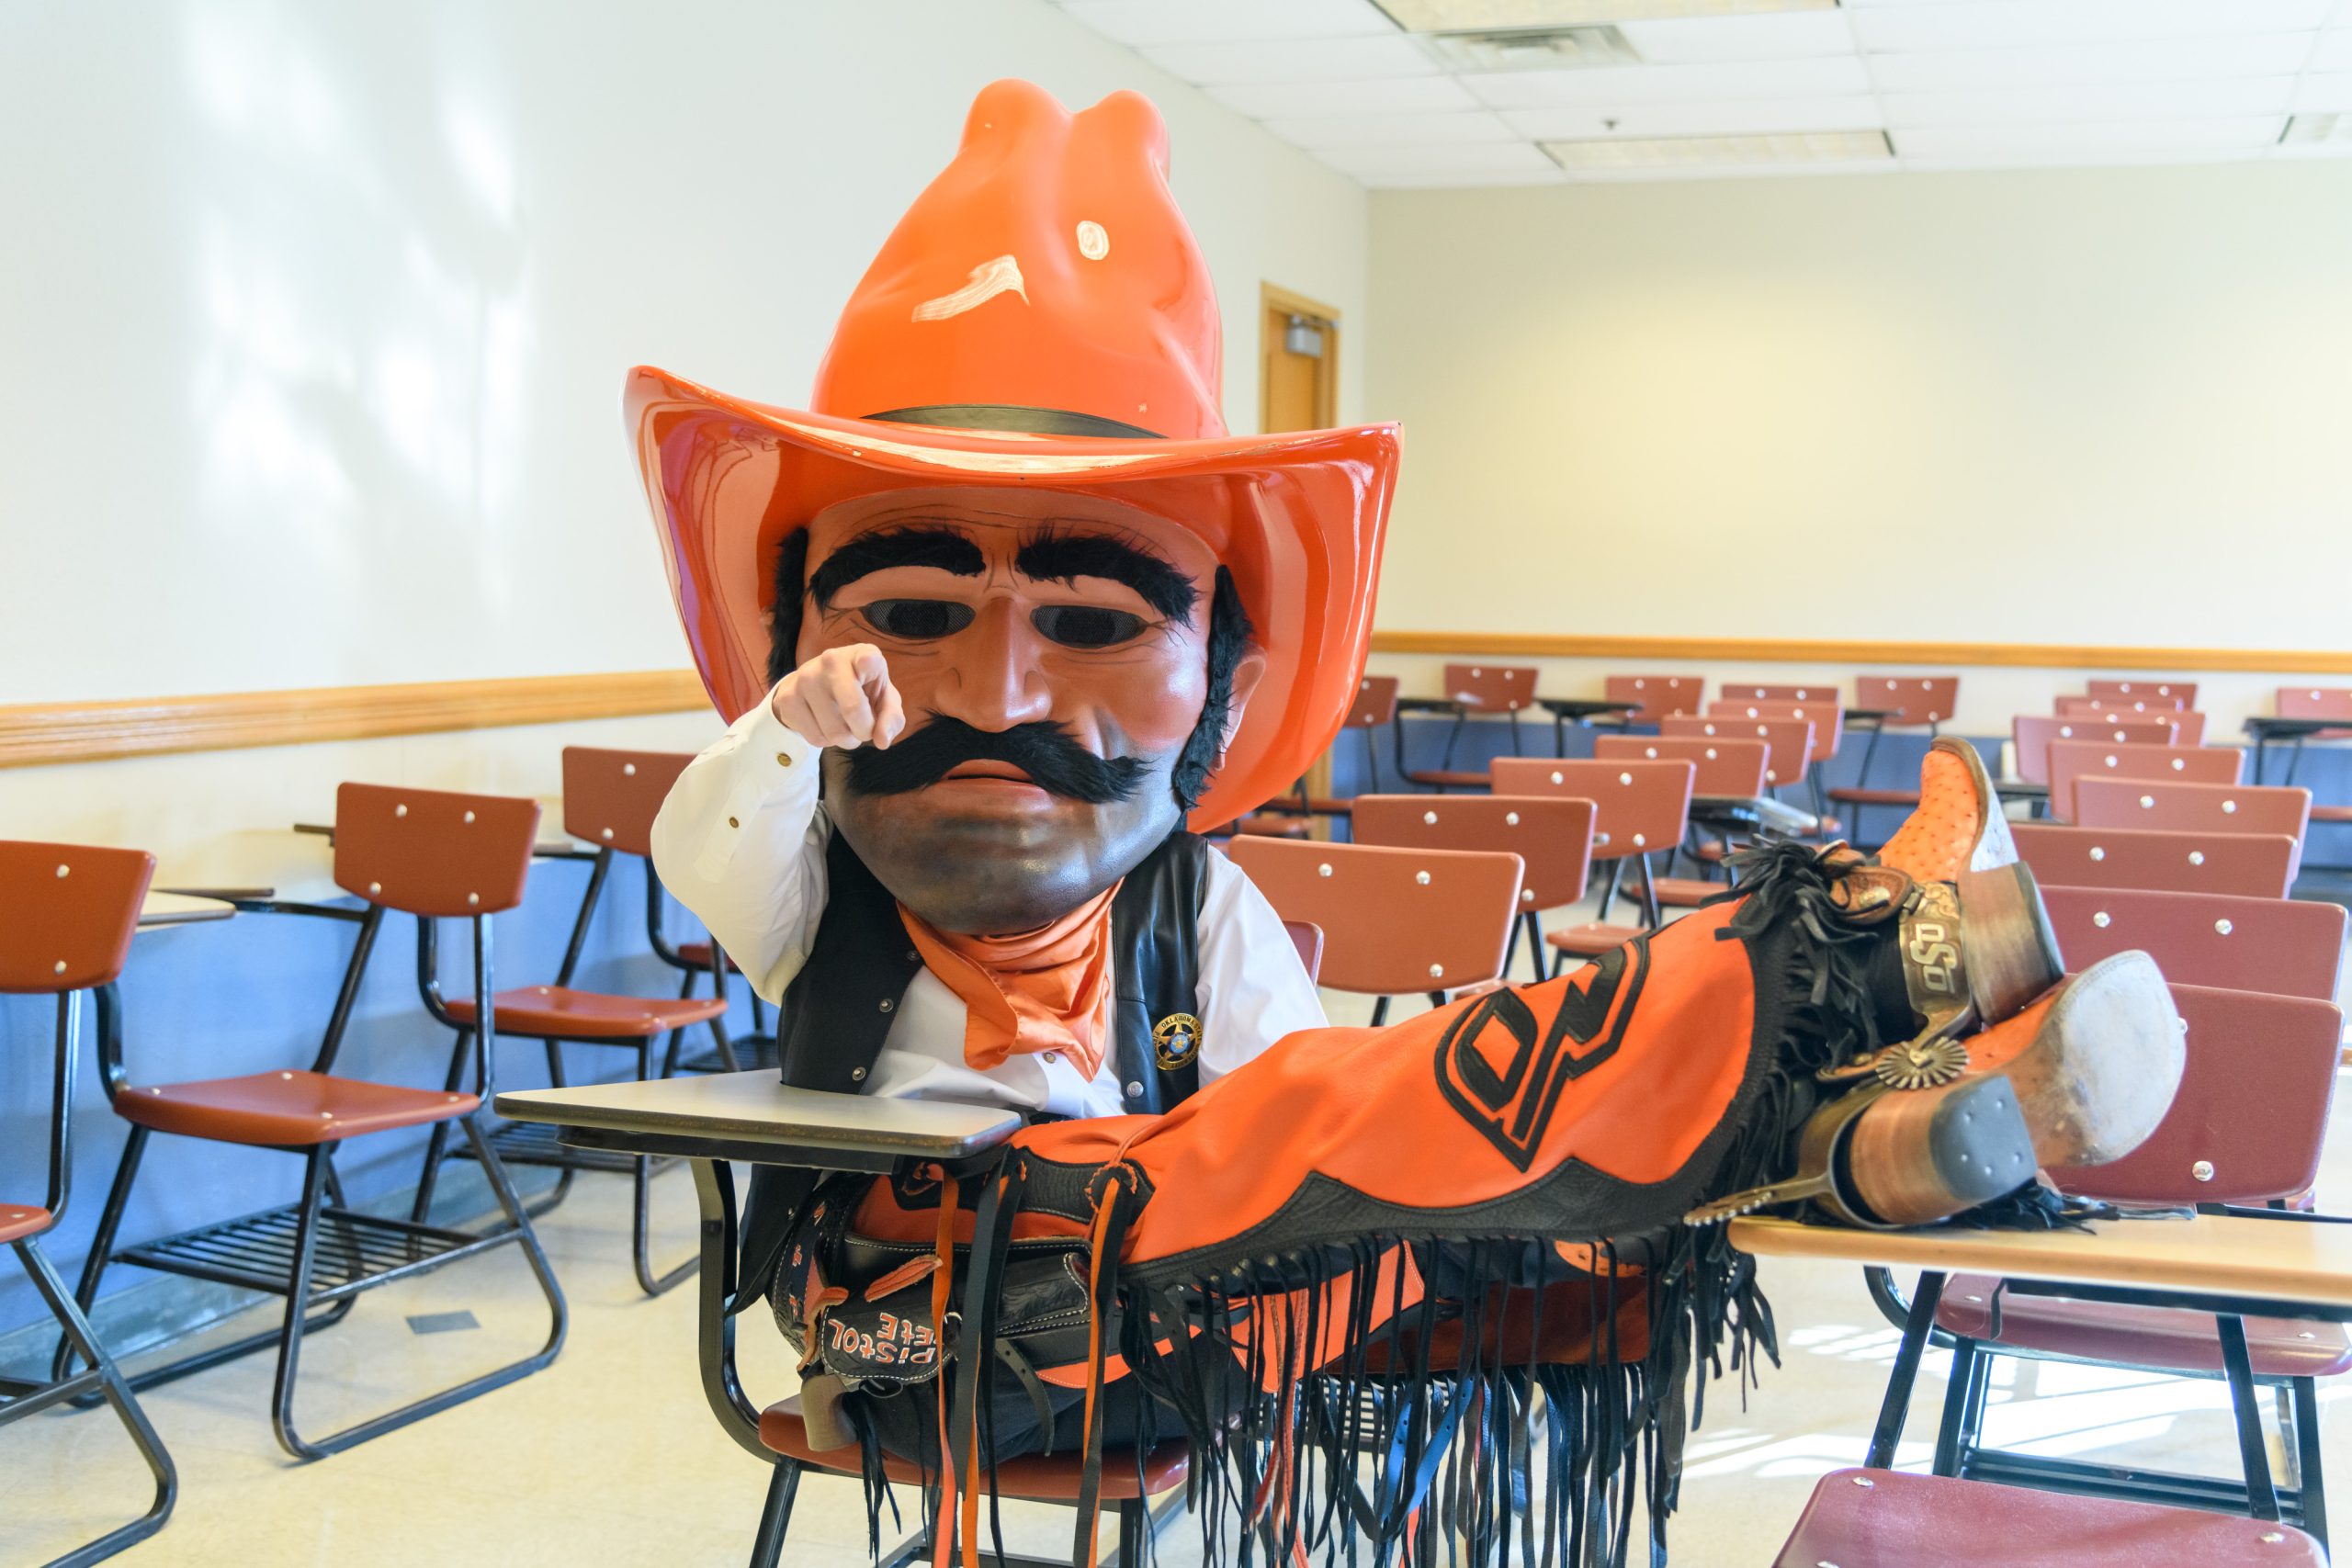 Pistol Pete is sitting with his legs crossed and on a student desk while pointing to the camera